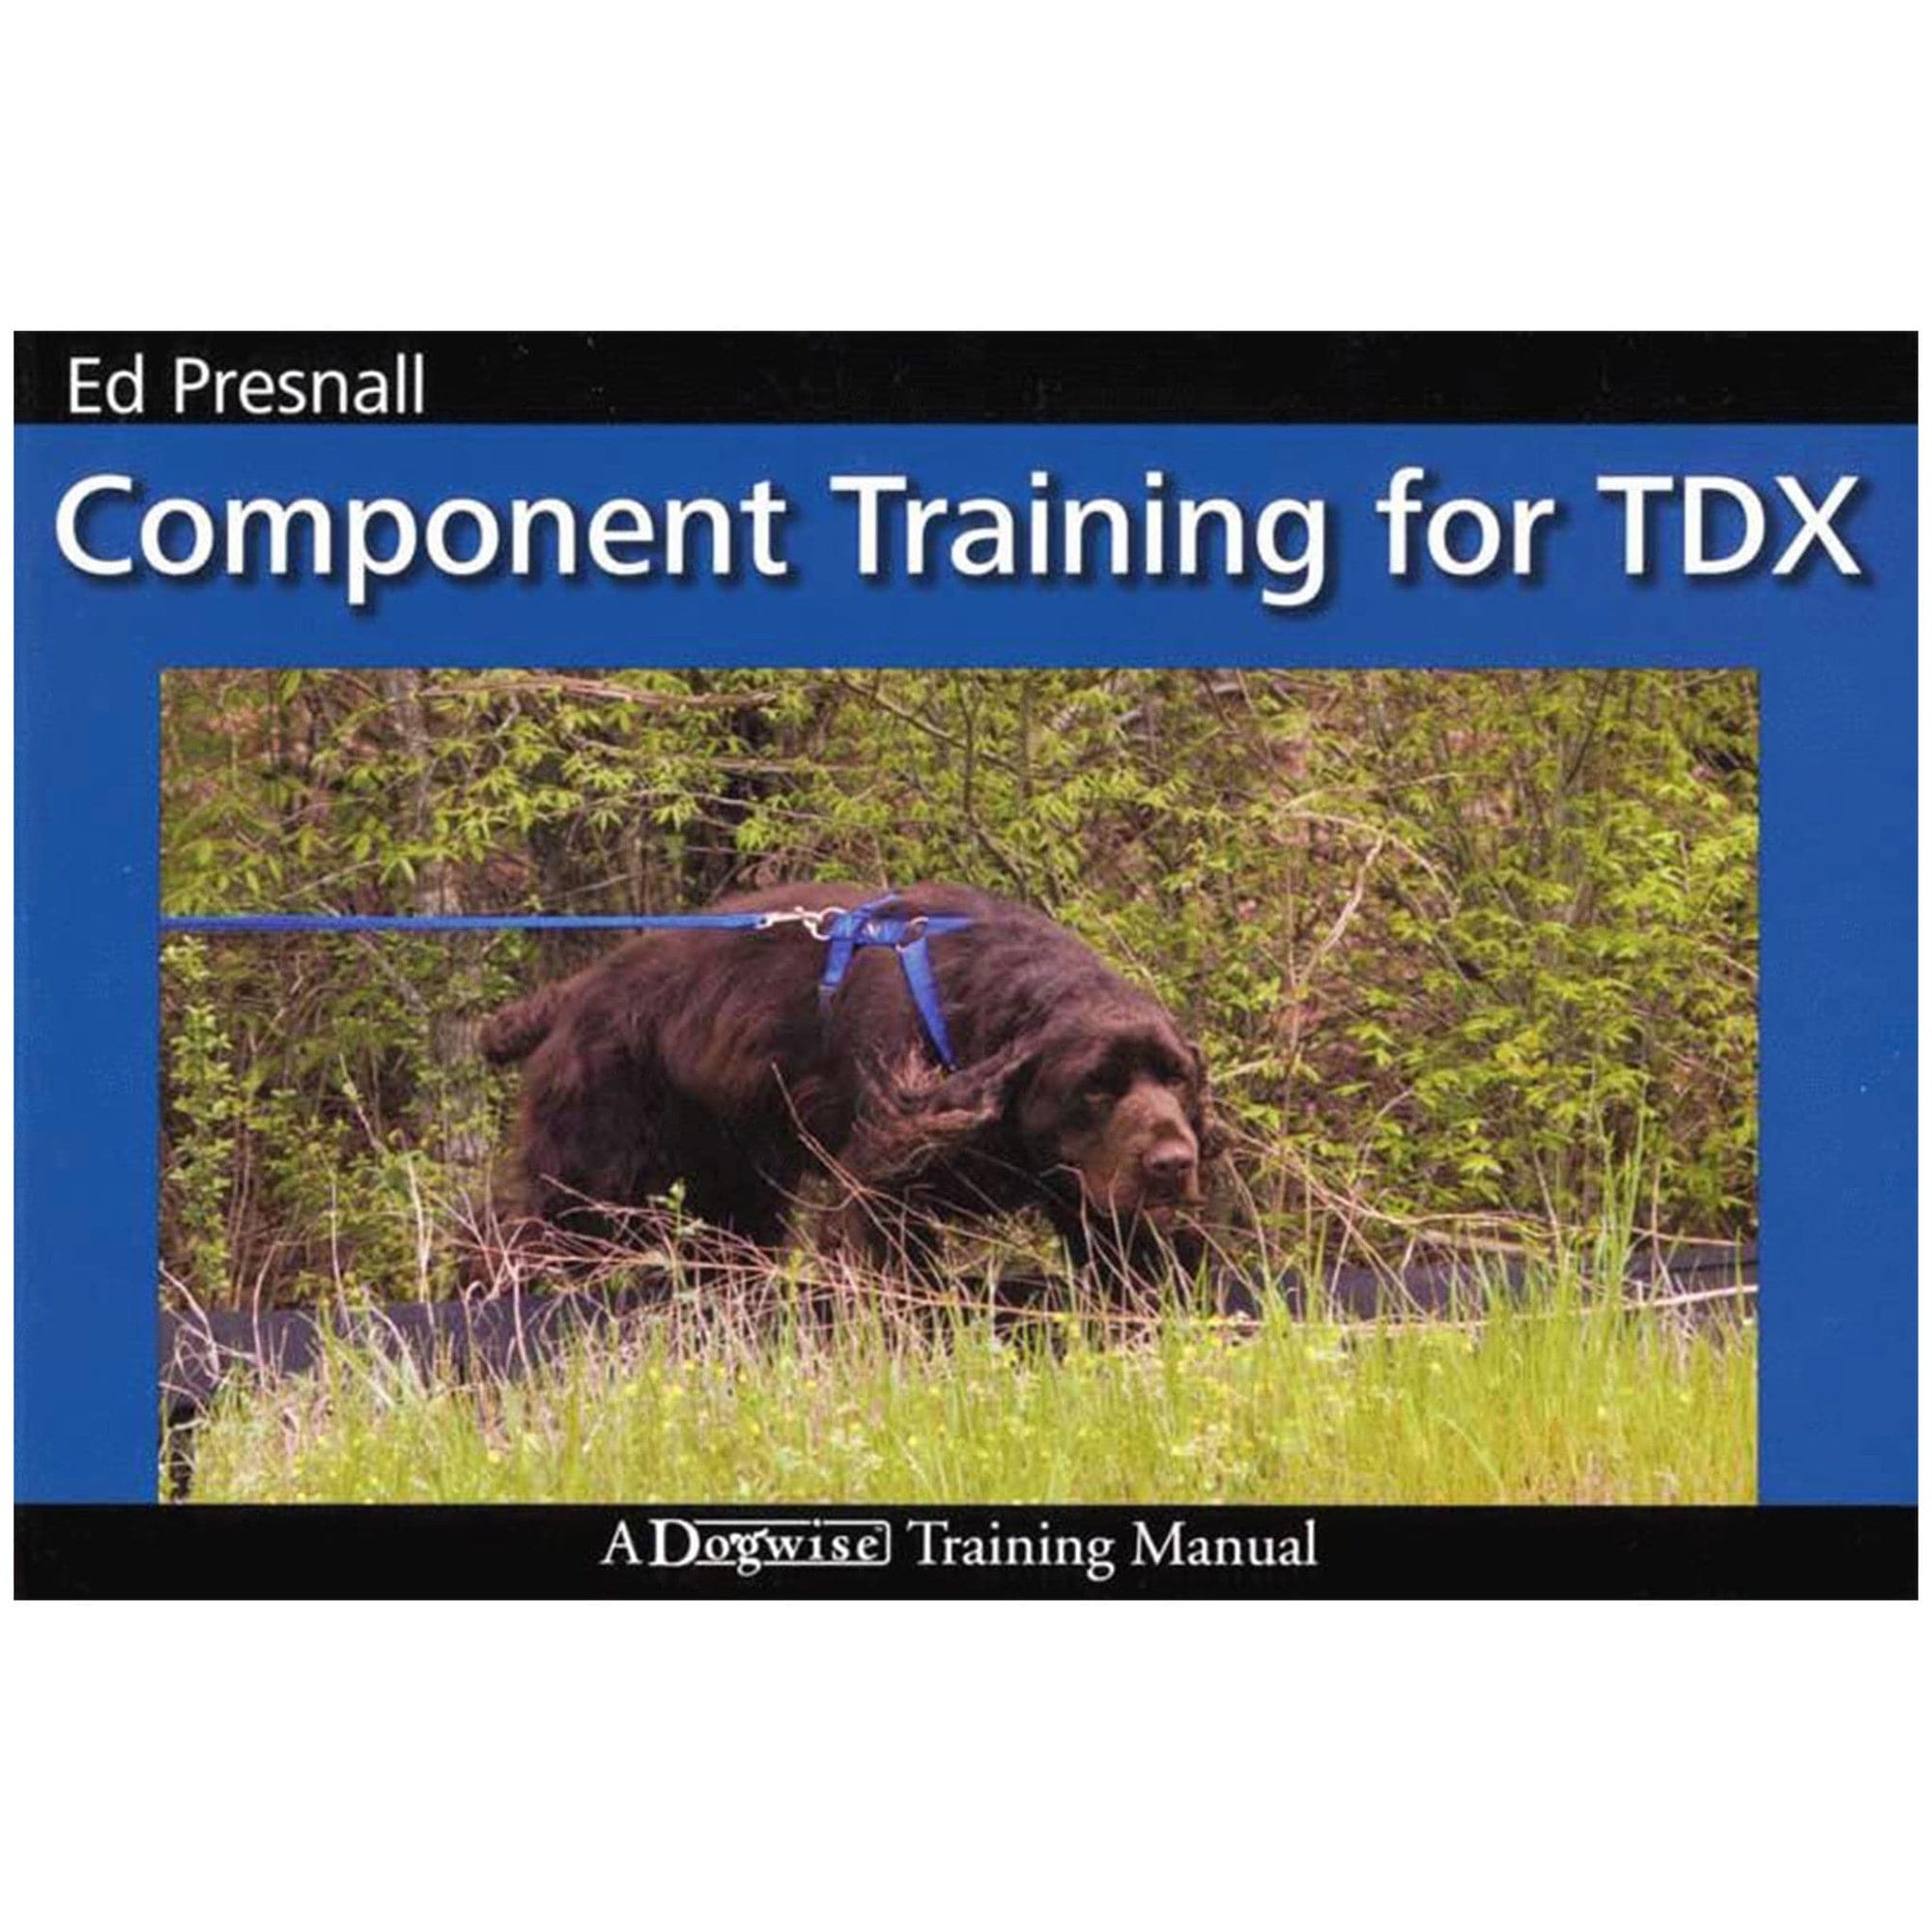 E-BOOK Component Training for TDX by Ed Presnall